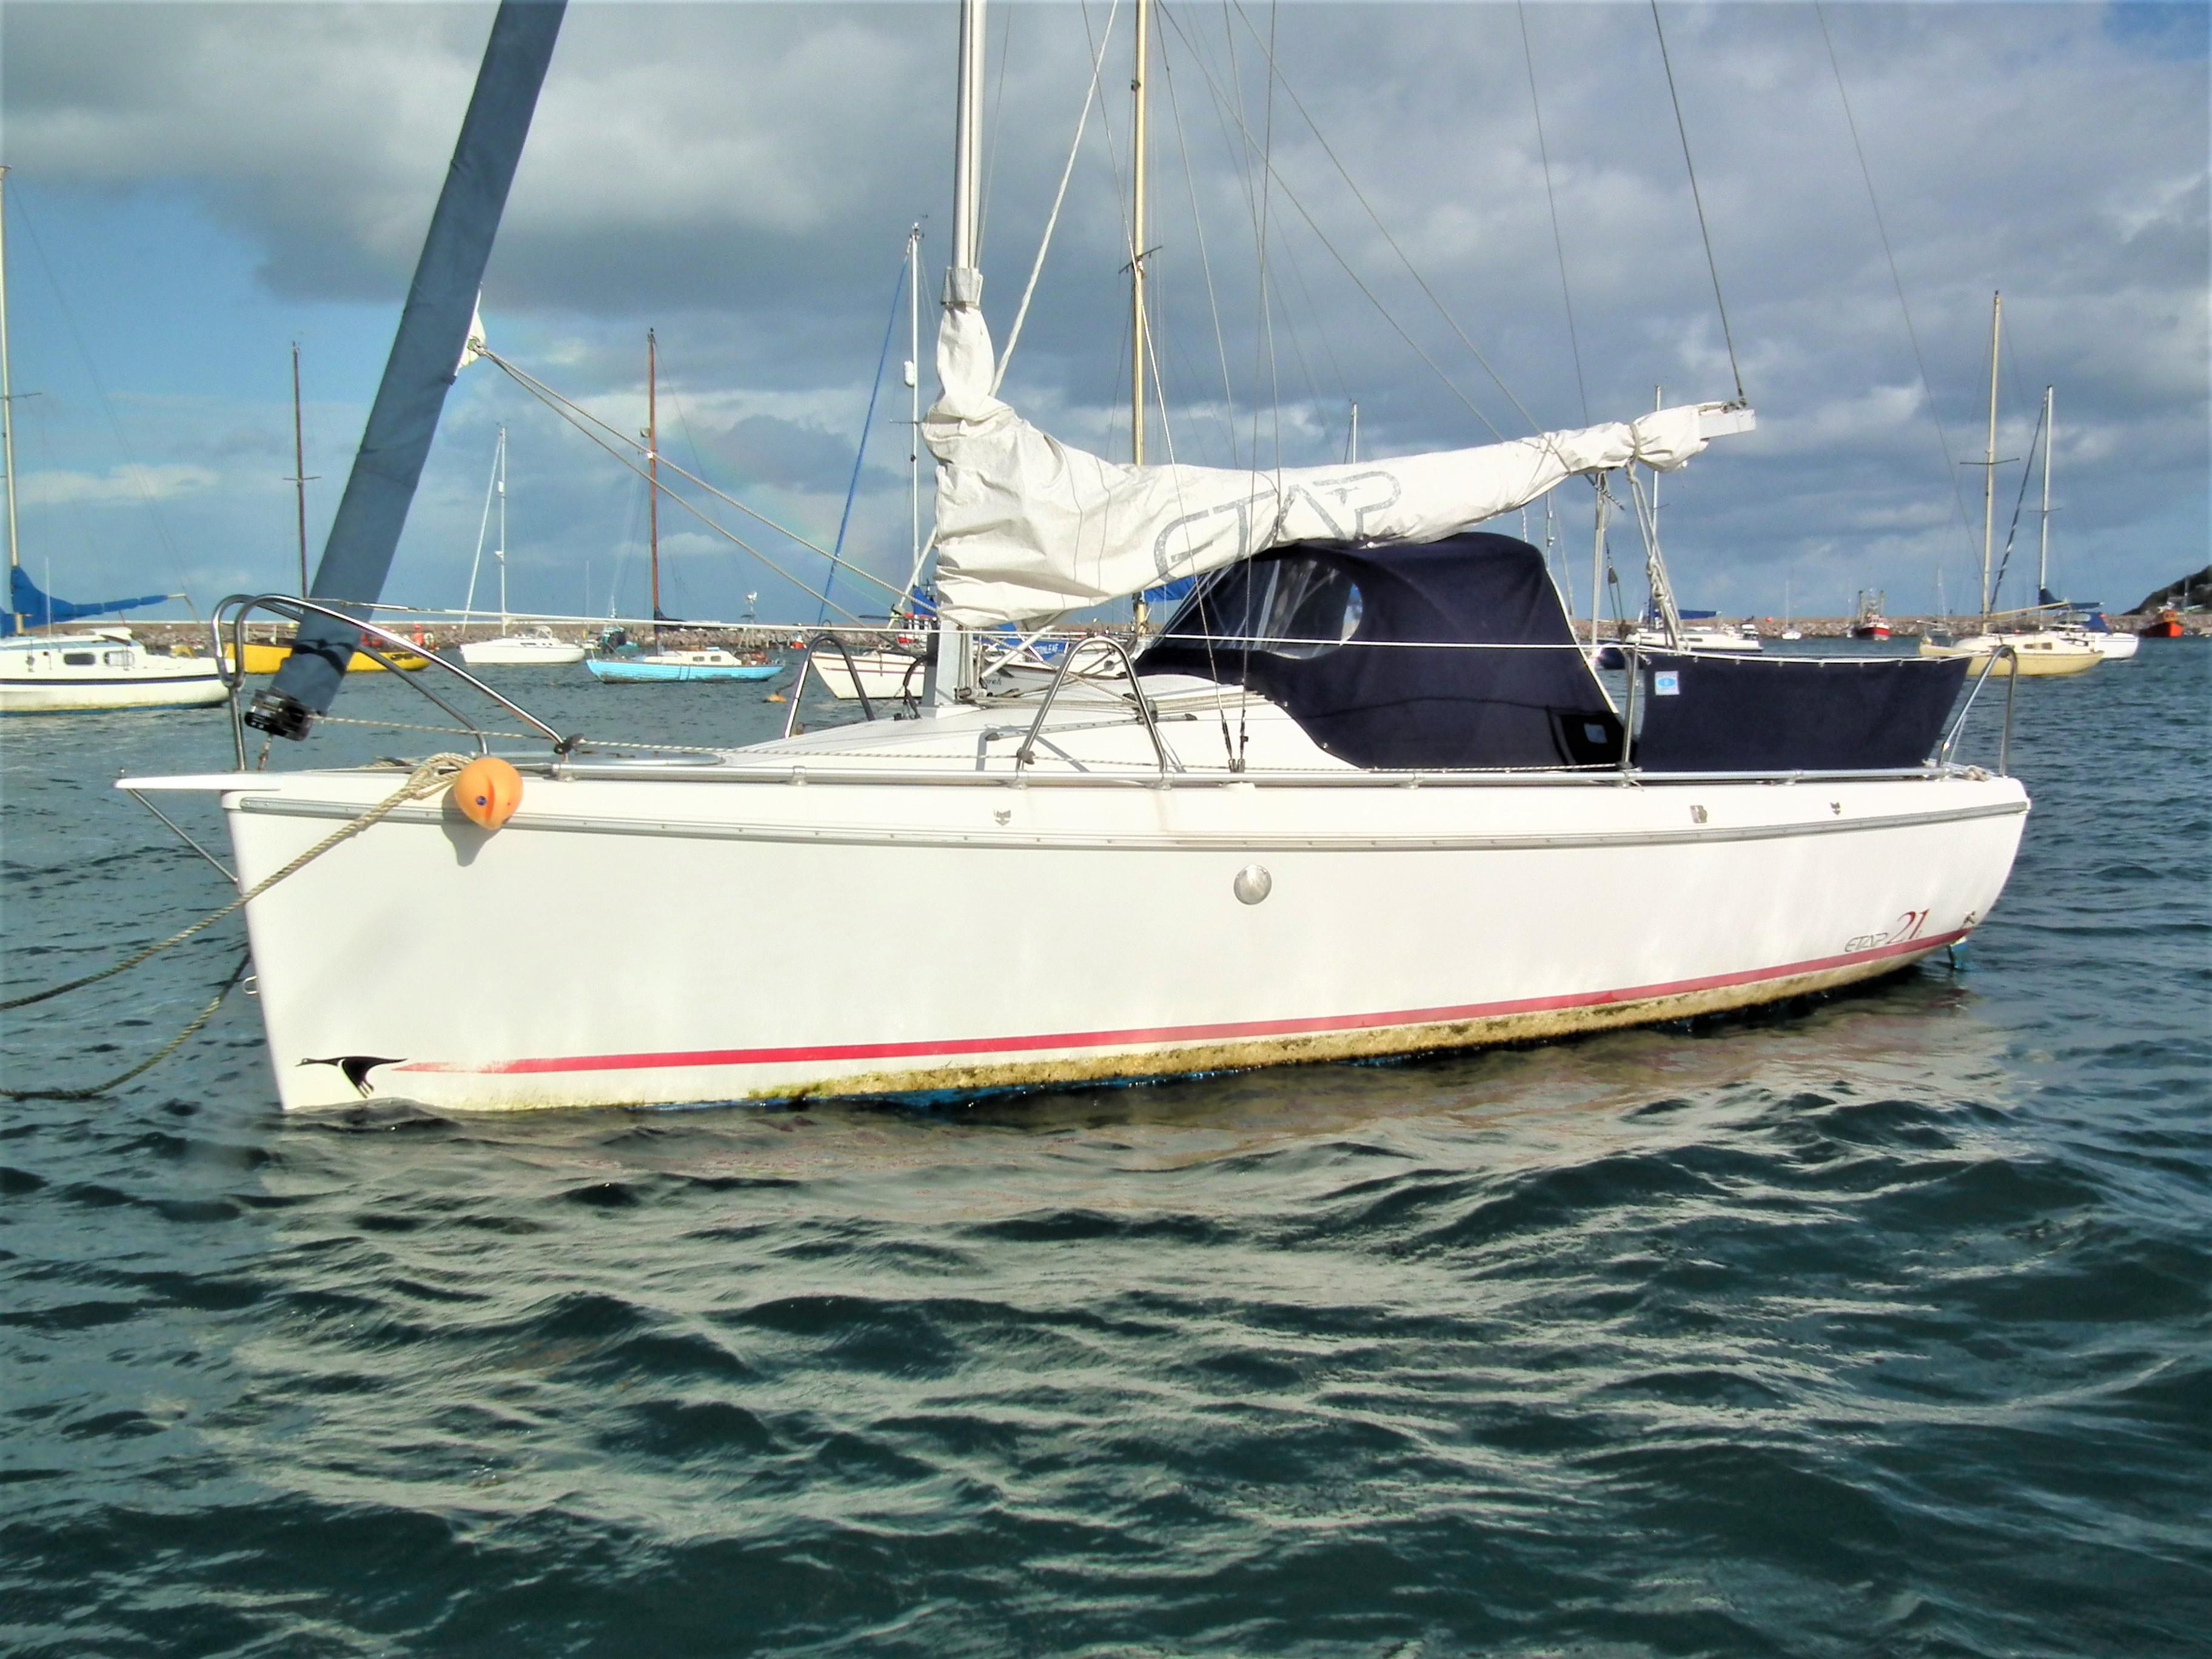 2002-etap-21i-sail-new-and-used-boats-for-sale-www-yachtworld-co-uk